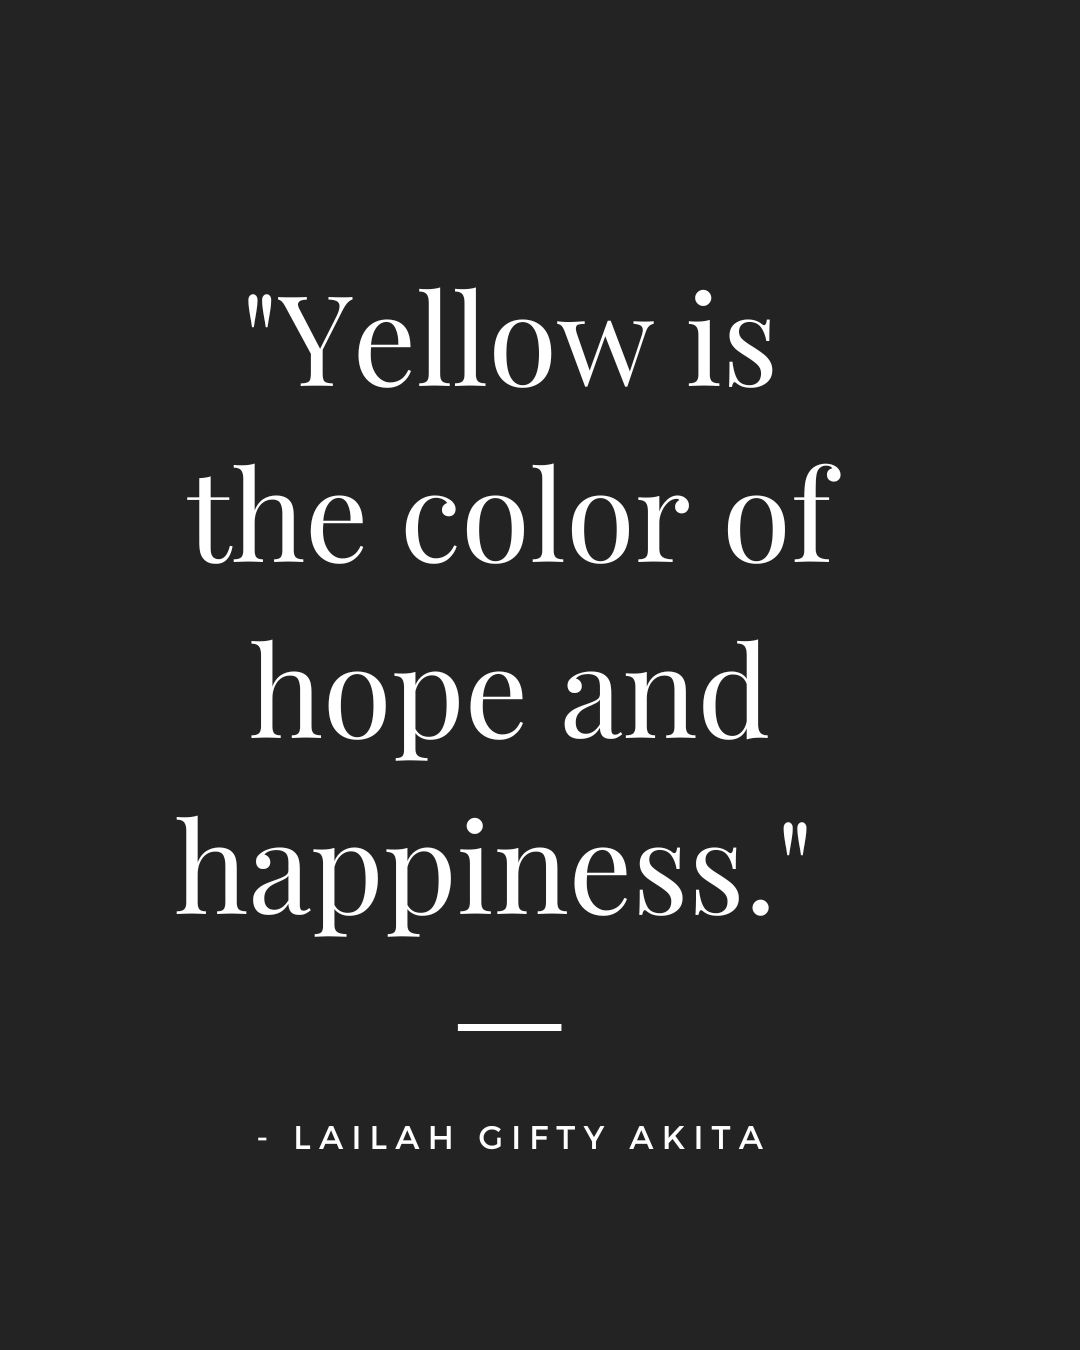 Yellow Quotes Happiness and Optimism: